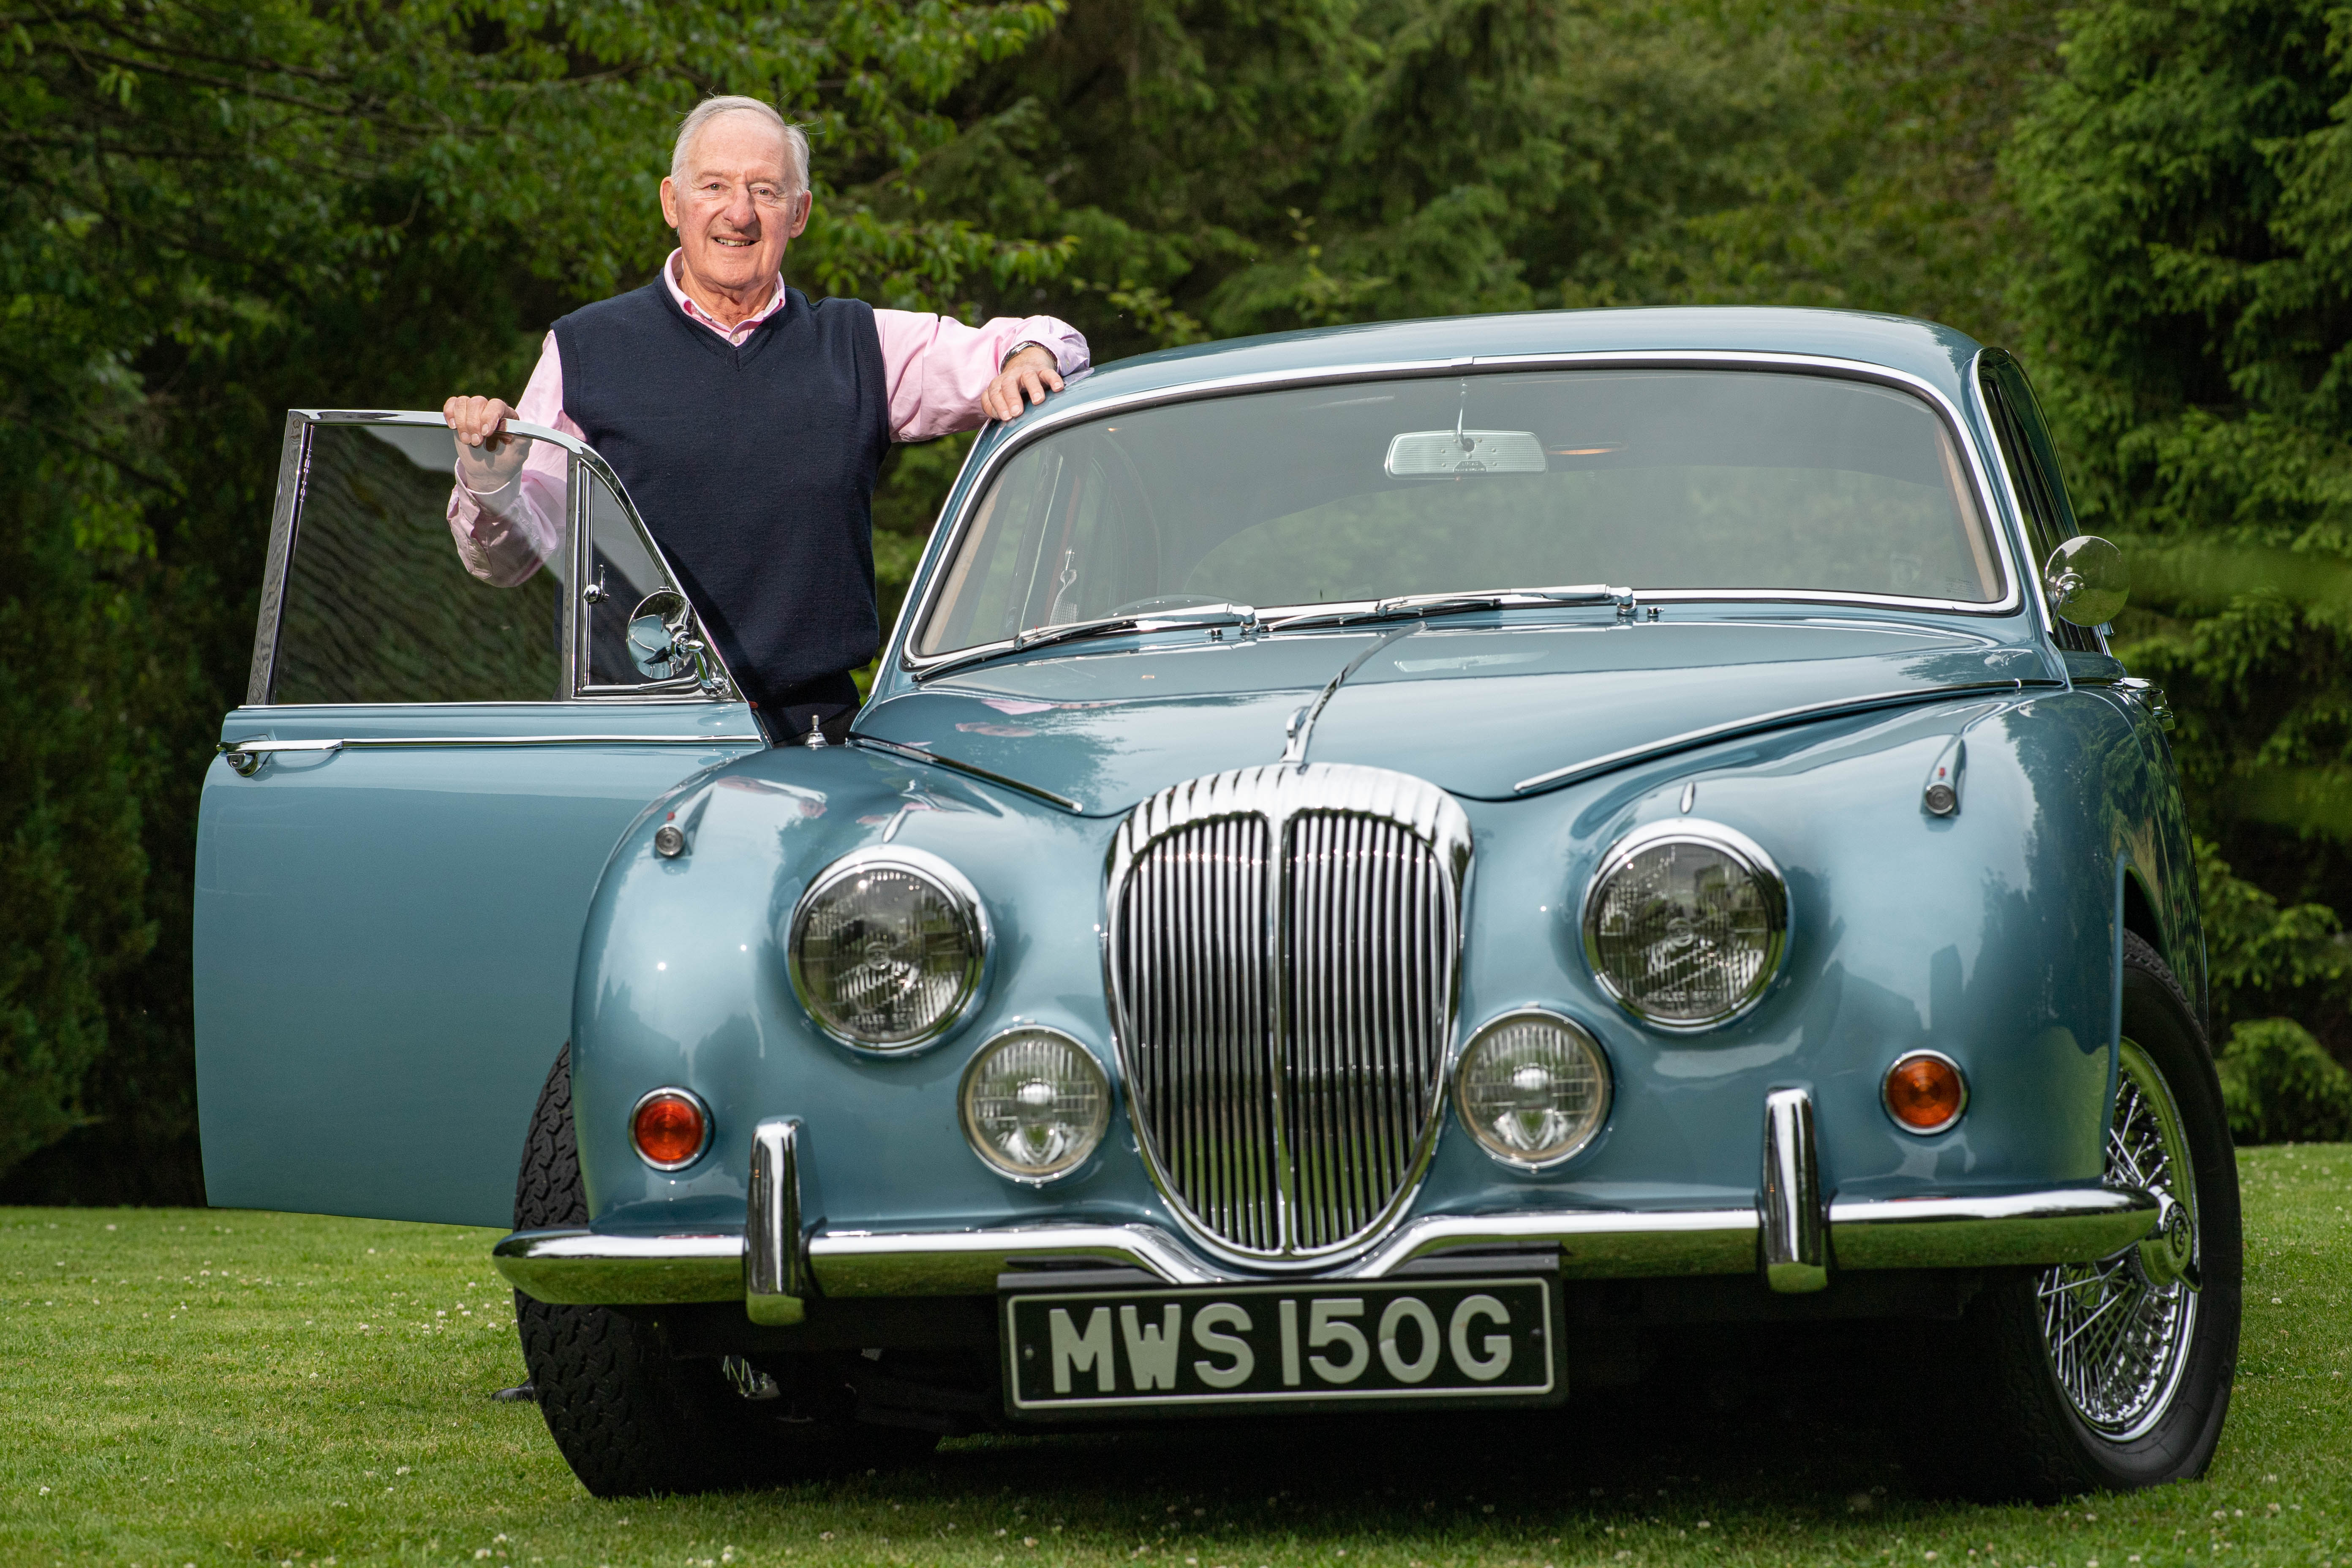 Roy Grant with his 1968 Daimler V8 250.